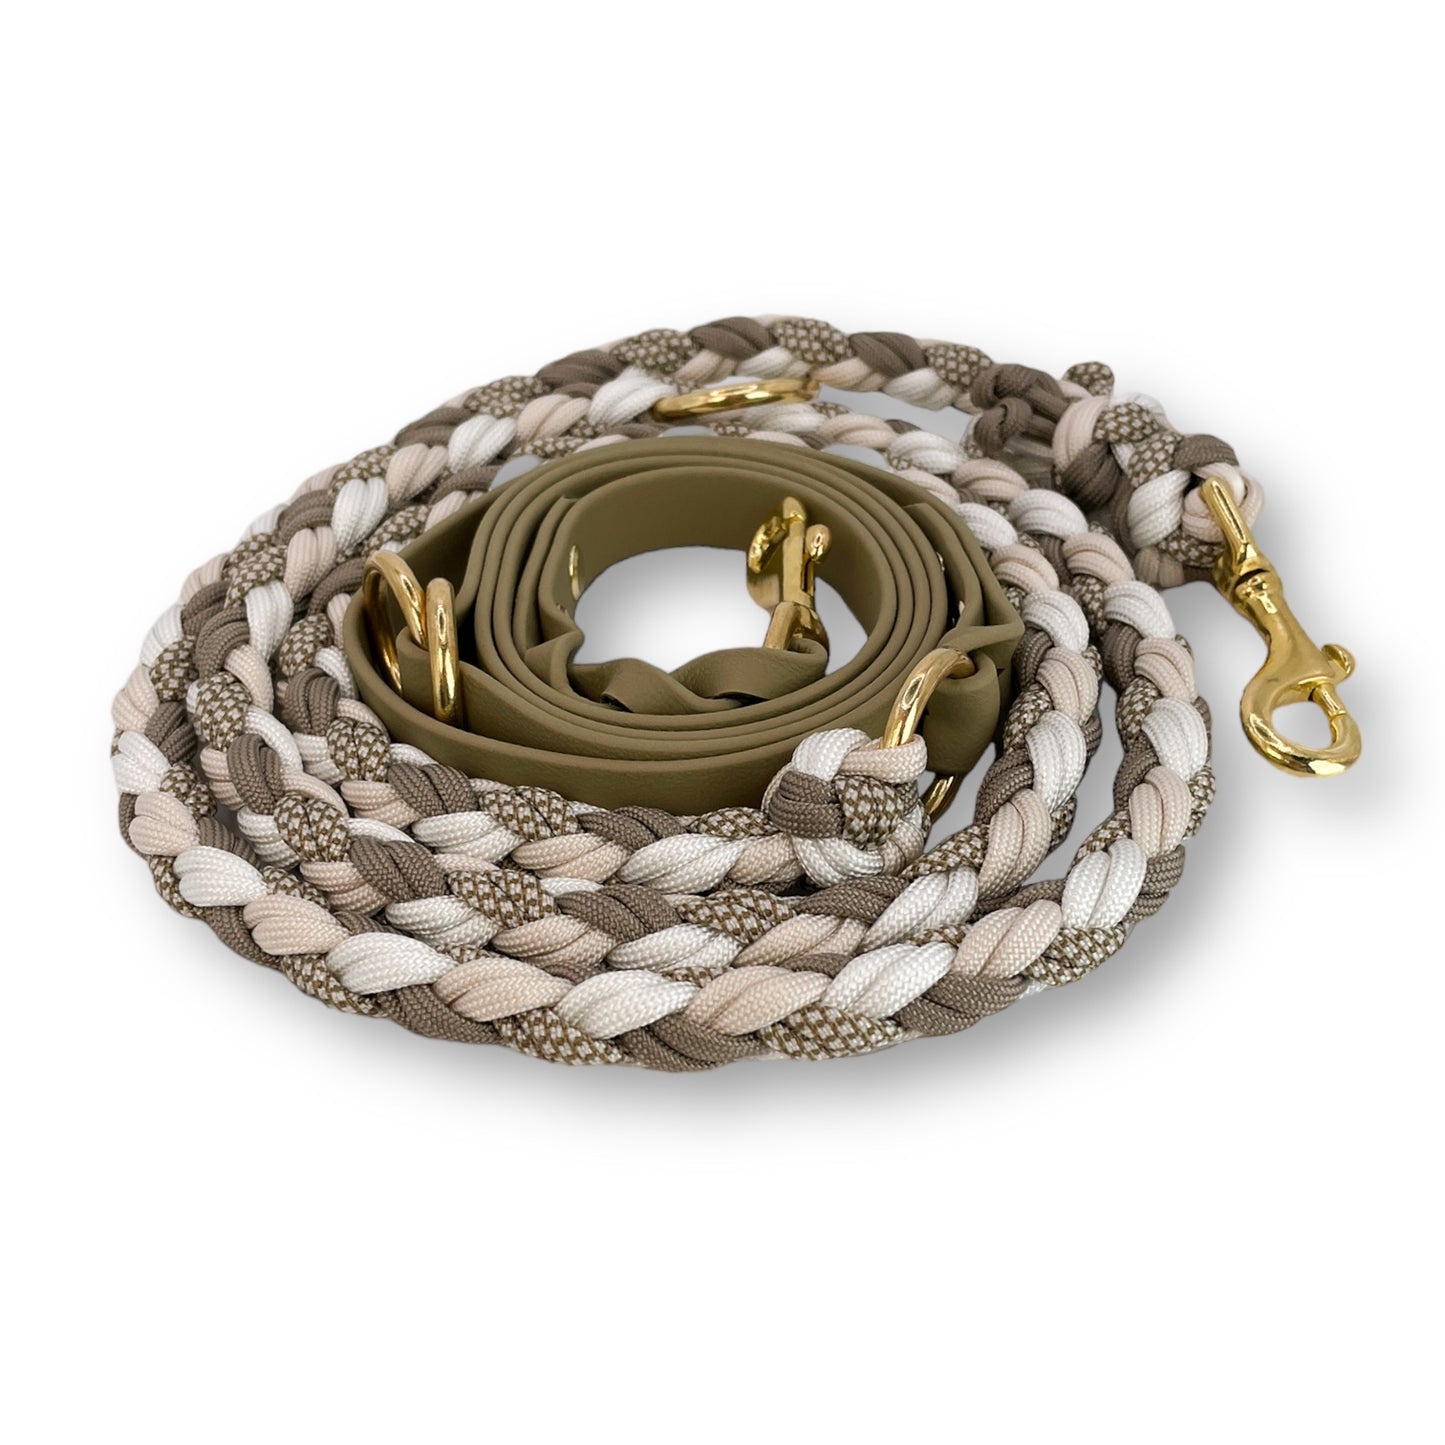 Leash "Paracord meets Biothane" in 3 lengths and different widths